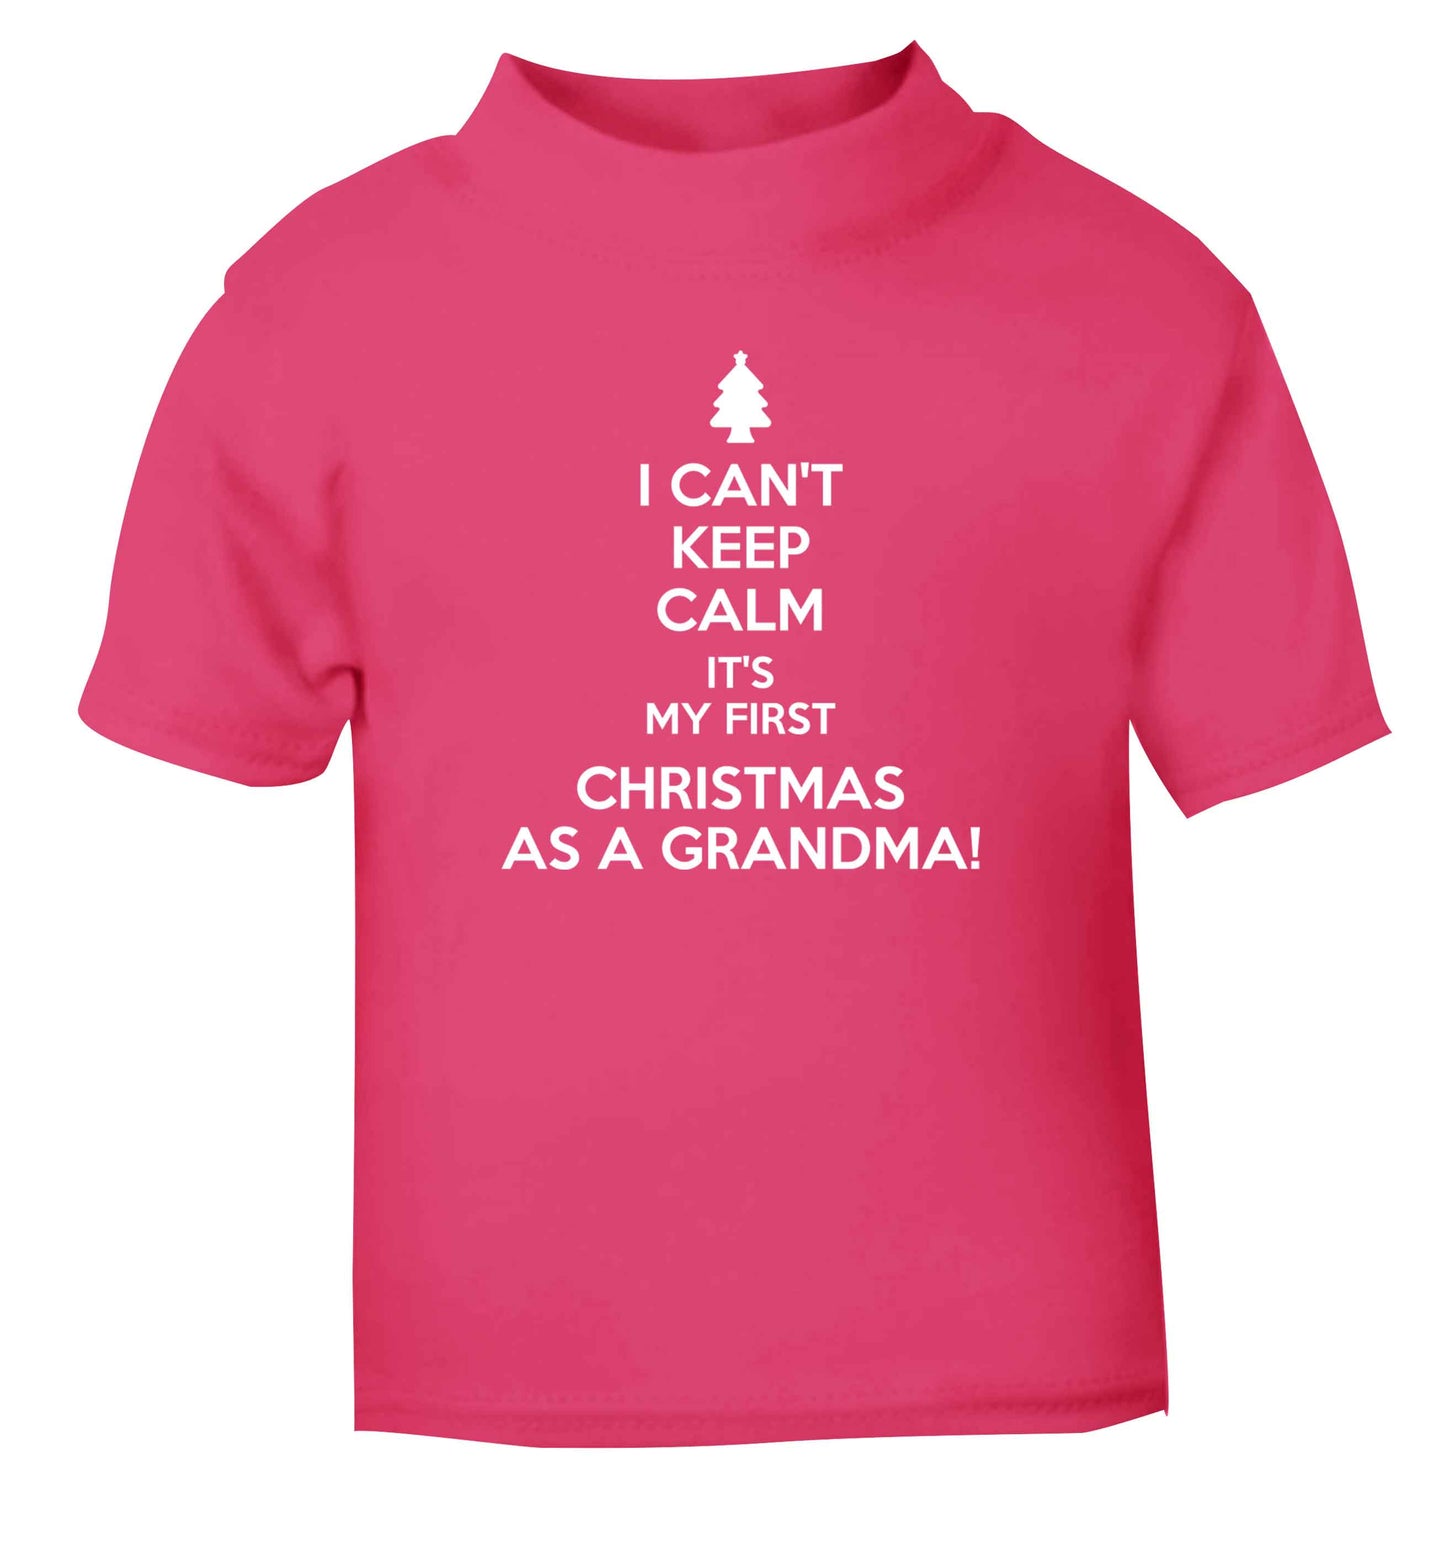 I can't keep calm it's my first Christmas as a grandma! pink Baby Toddler Tshirt 2 Years